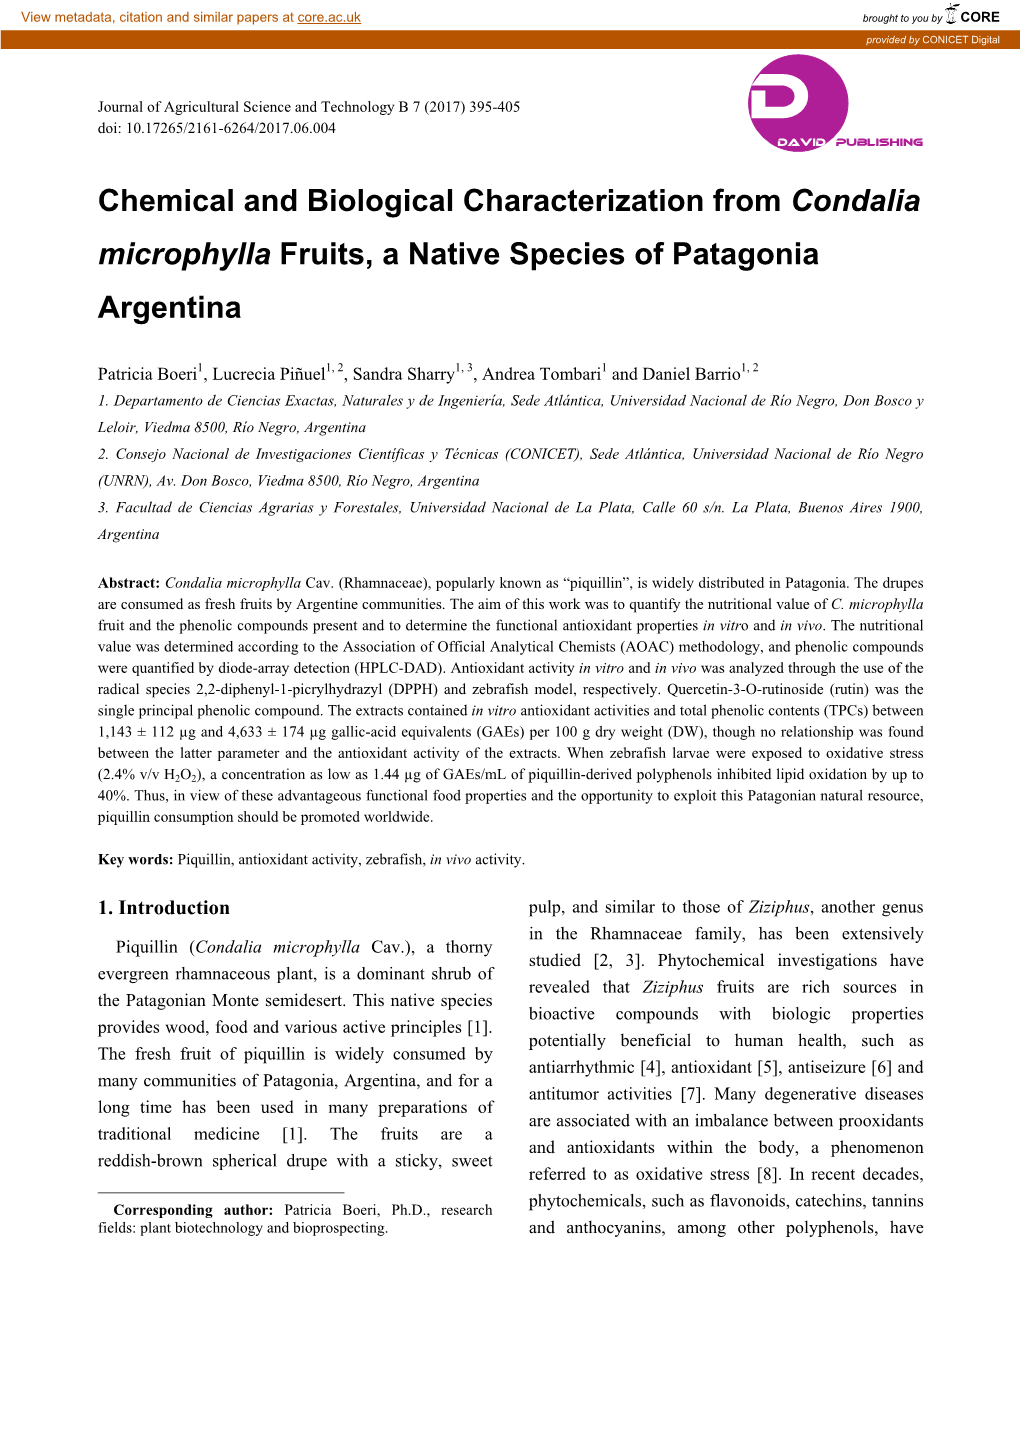 Chemical and Biological Characterization from Condalia Microphylla Fruits, a Native Species of Patagonia Argentina